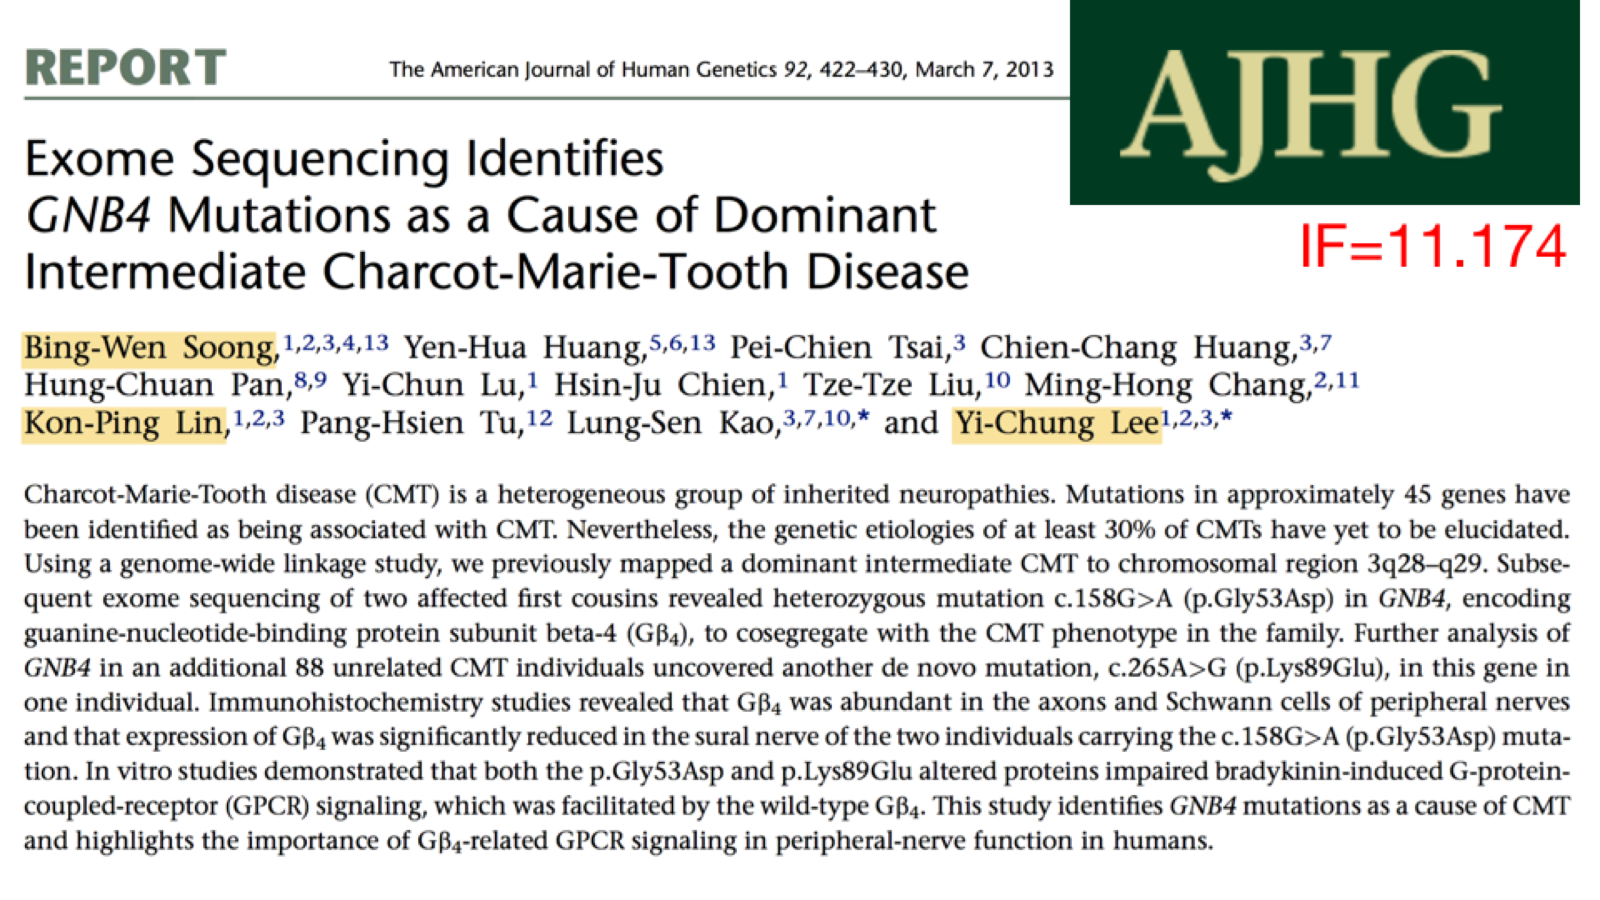 Exome Sequencing Identifies GNB4 Mutations as a Cause of Dominant Intermediate Charcot-Marie-Tooth Disease. IF=11.174